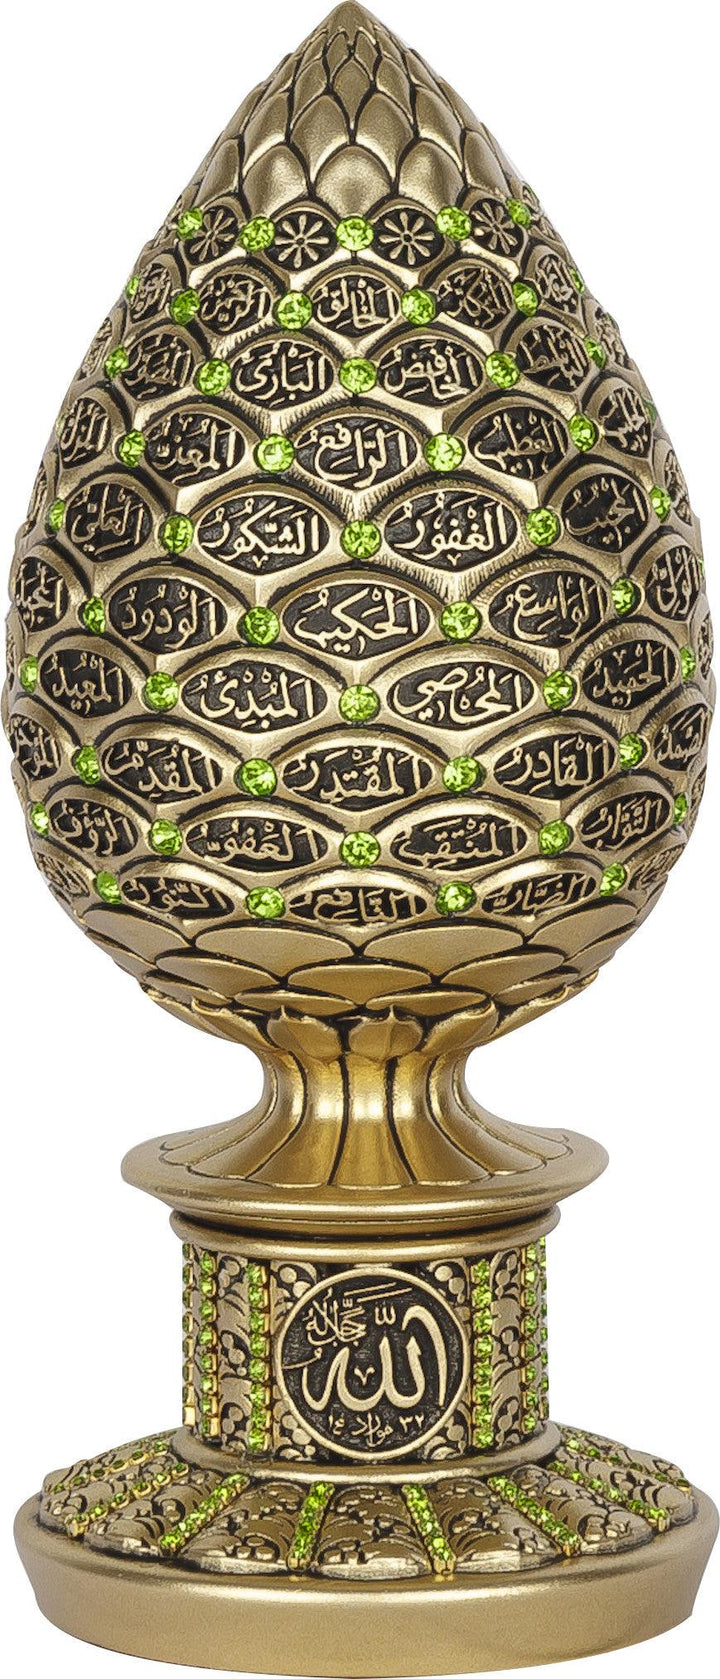 Islamic Table Decor Golden pine cone with Blue stones - 99 Names of Allah Alif collection BB-0913-1636-theislamicshop.com